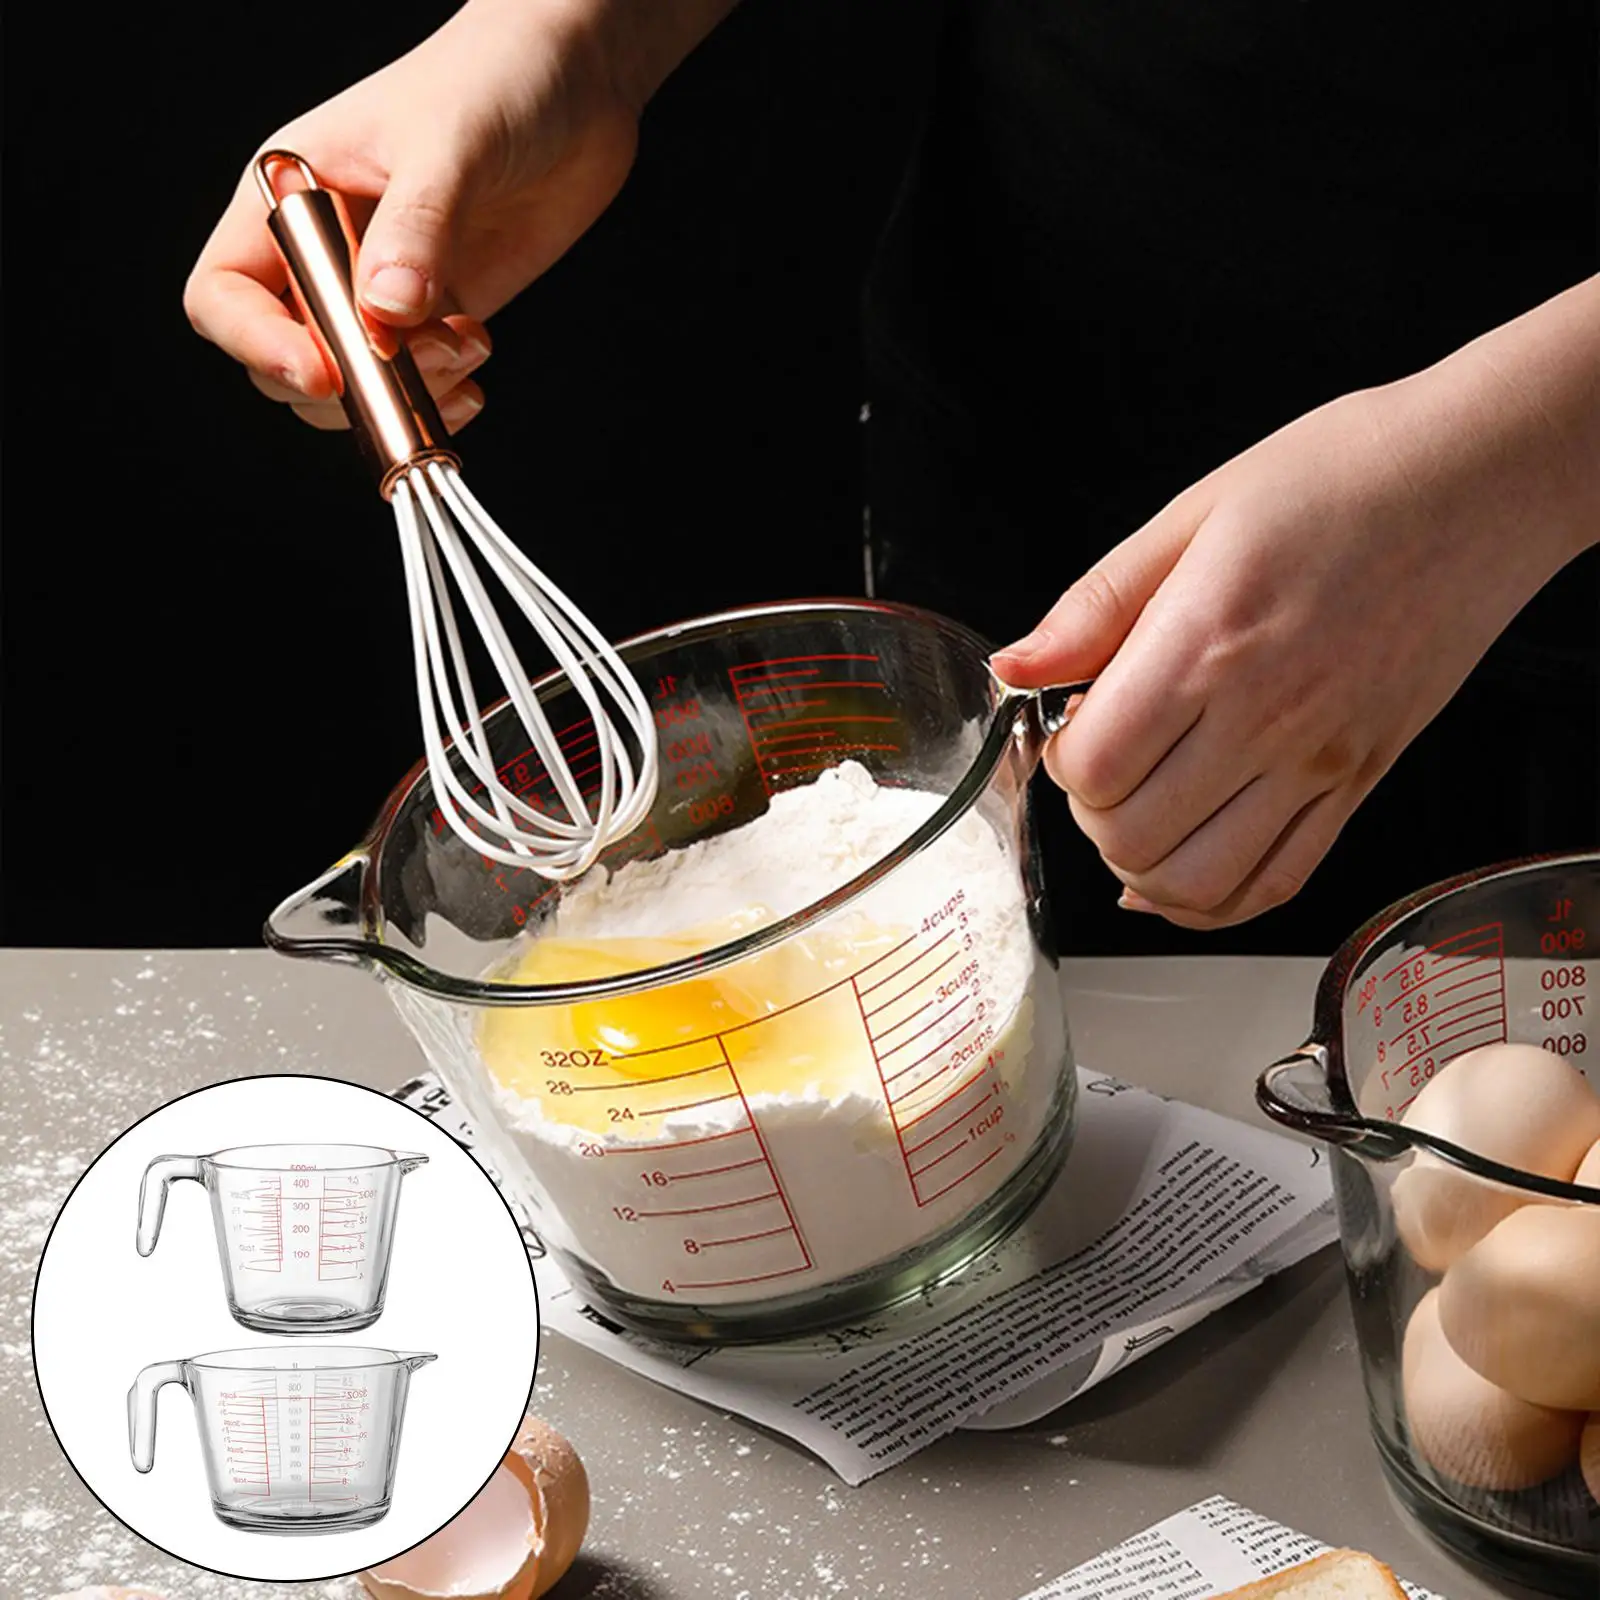 Transparent Glass Measuring Mug Kitchen Utensil with Scale Measuring Tool Heat-Resistant Glass Measuring Cup for Bar Accessories